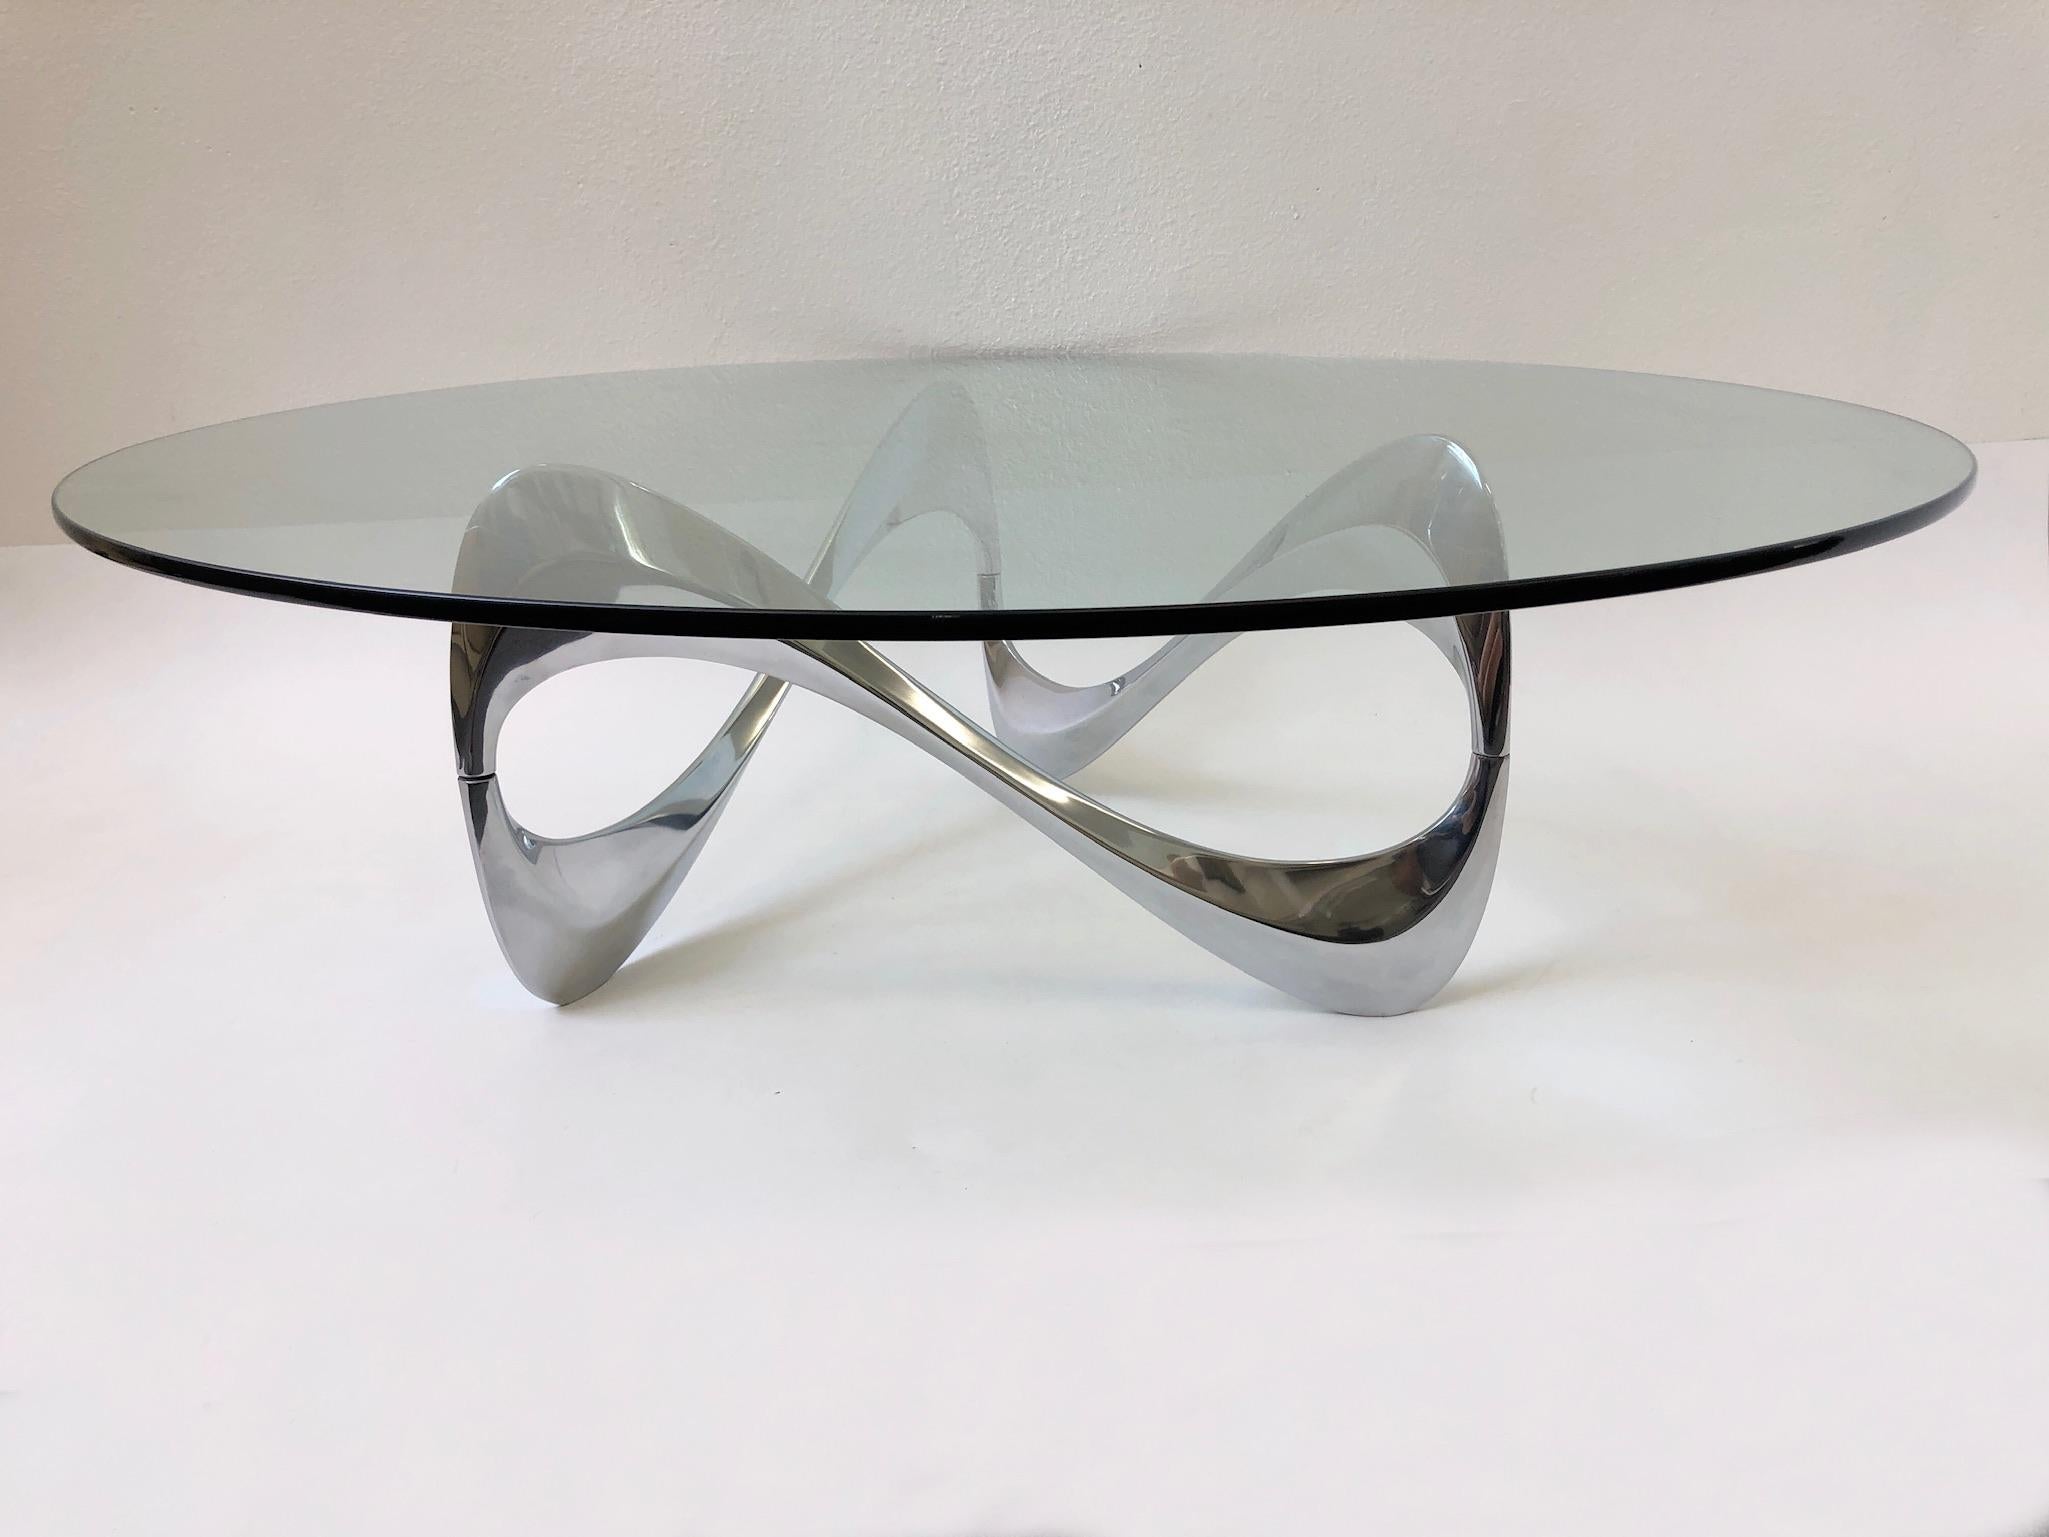 German Polish Aluminum and Glass Cocktail Table by Knut Hesterberg